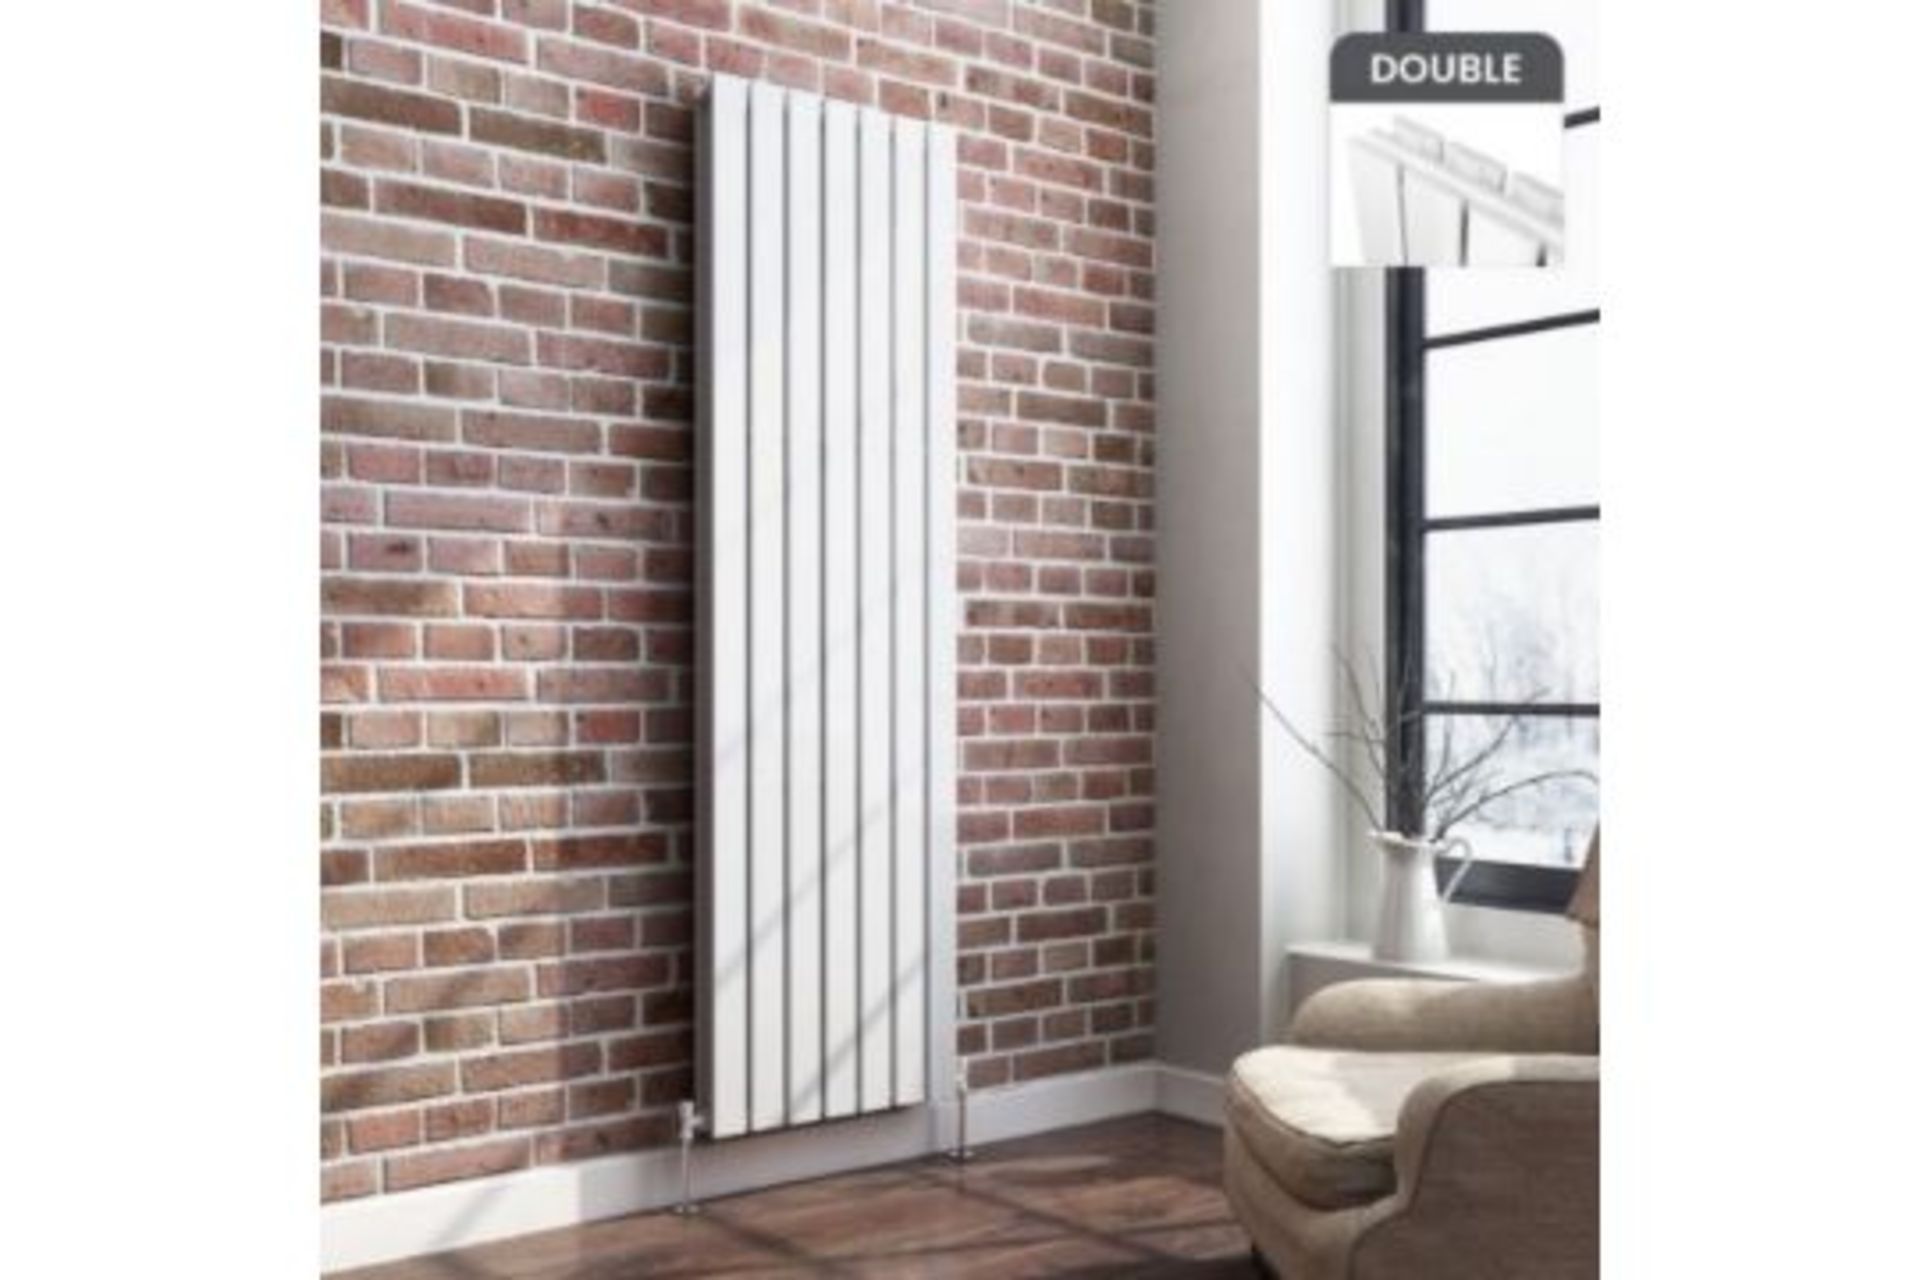 New 1800x532mm Gloss White Double Flat Panel Vertical Radiator. Rc262.Designer Touch Ultra-